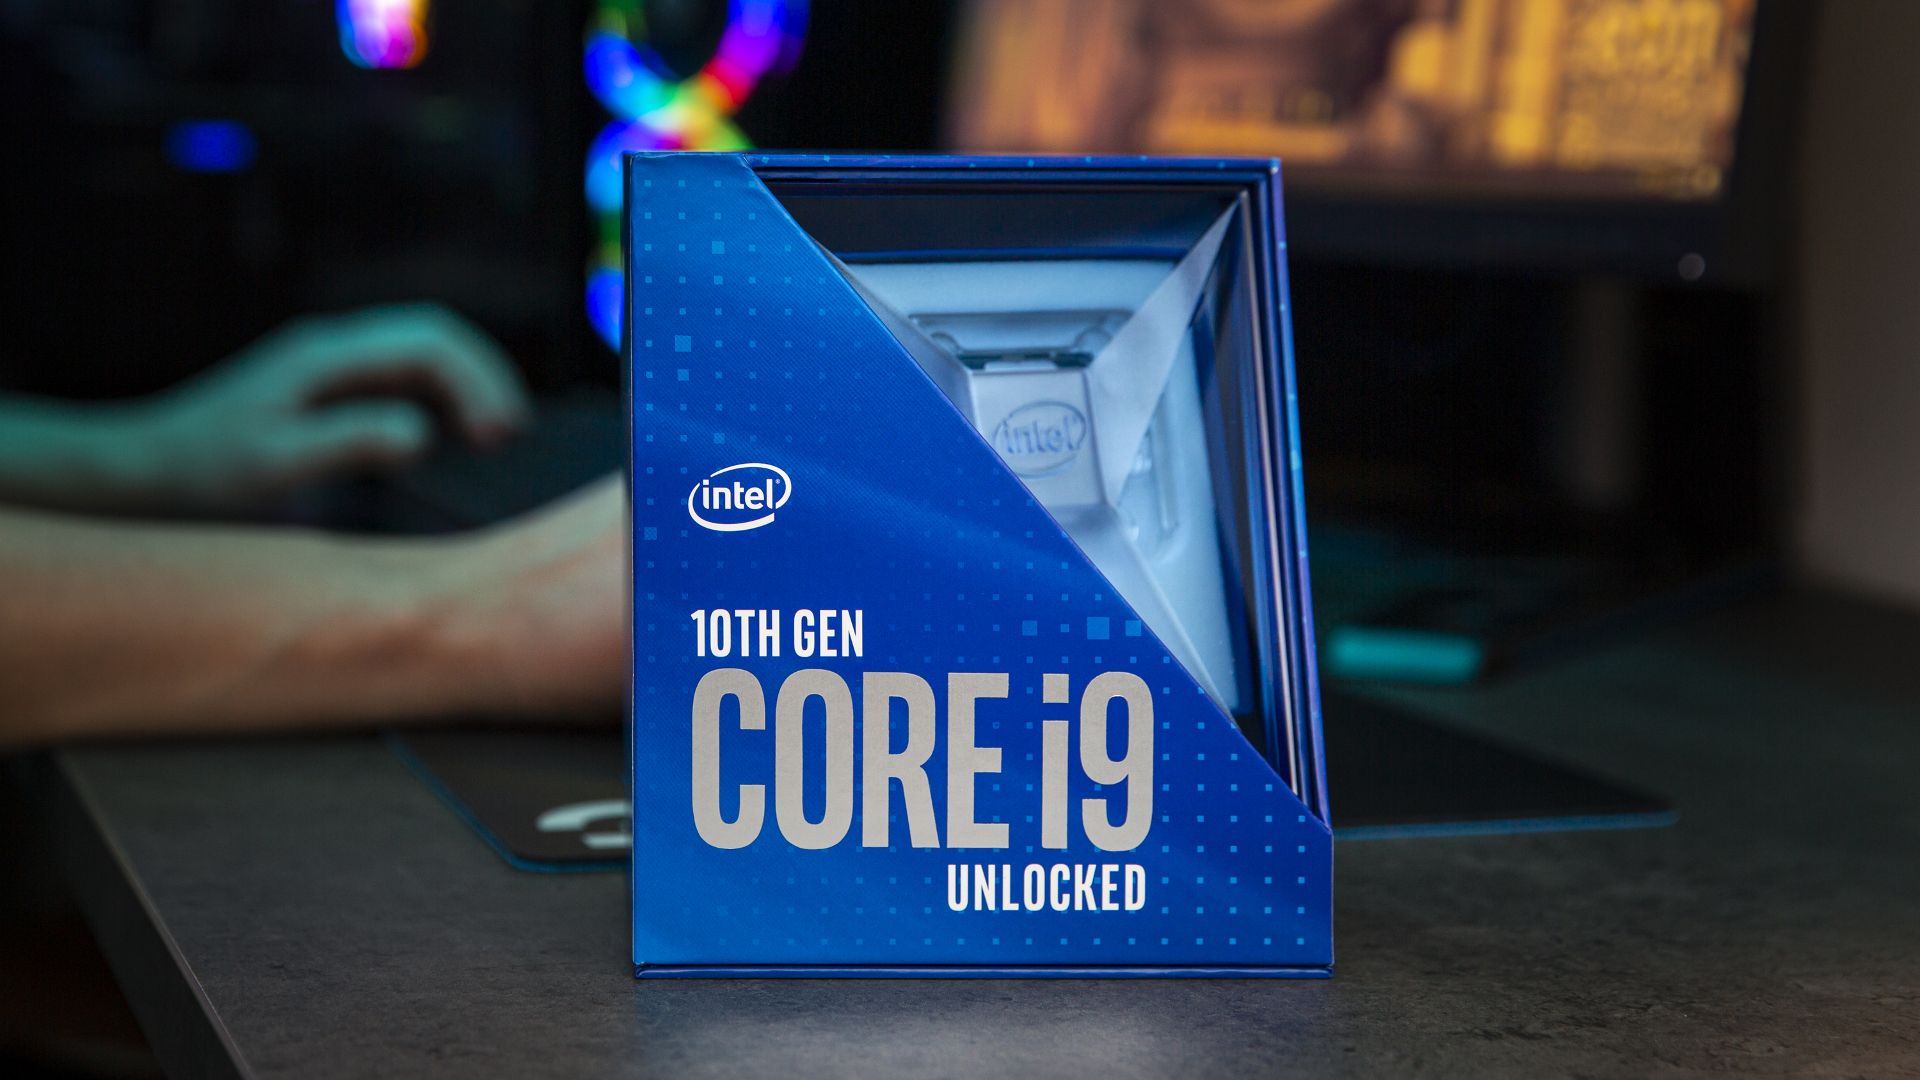 Intel Core I9 10900K CPU Might Be Pricey, But At Least You Can Insure It For Overclocking